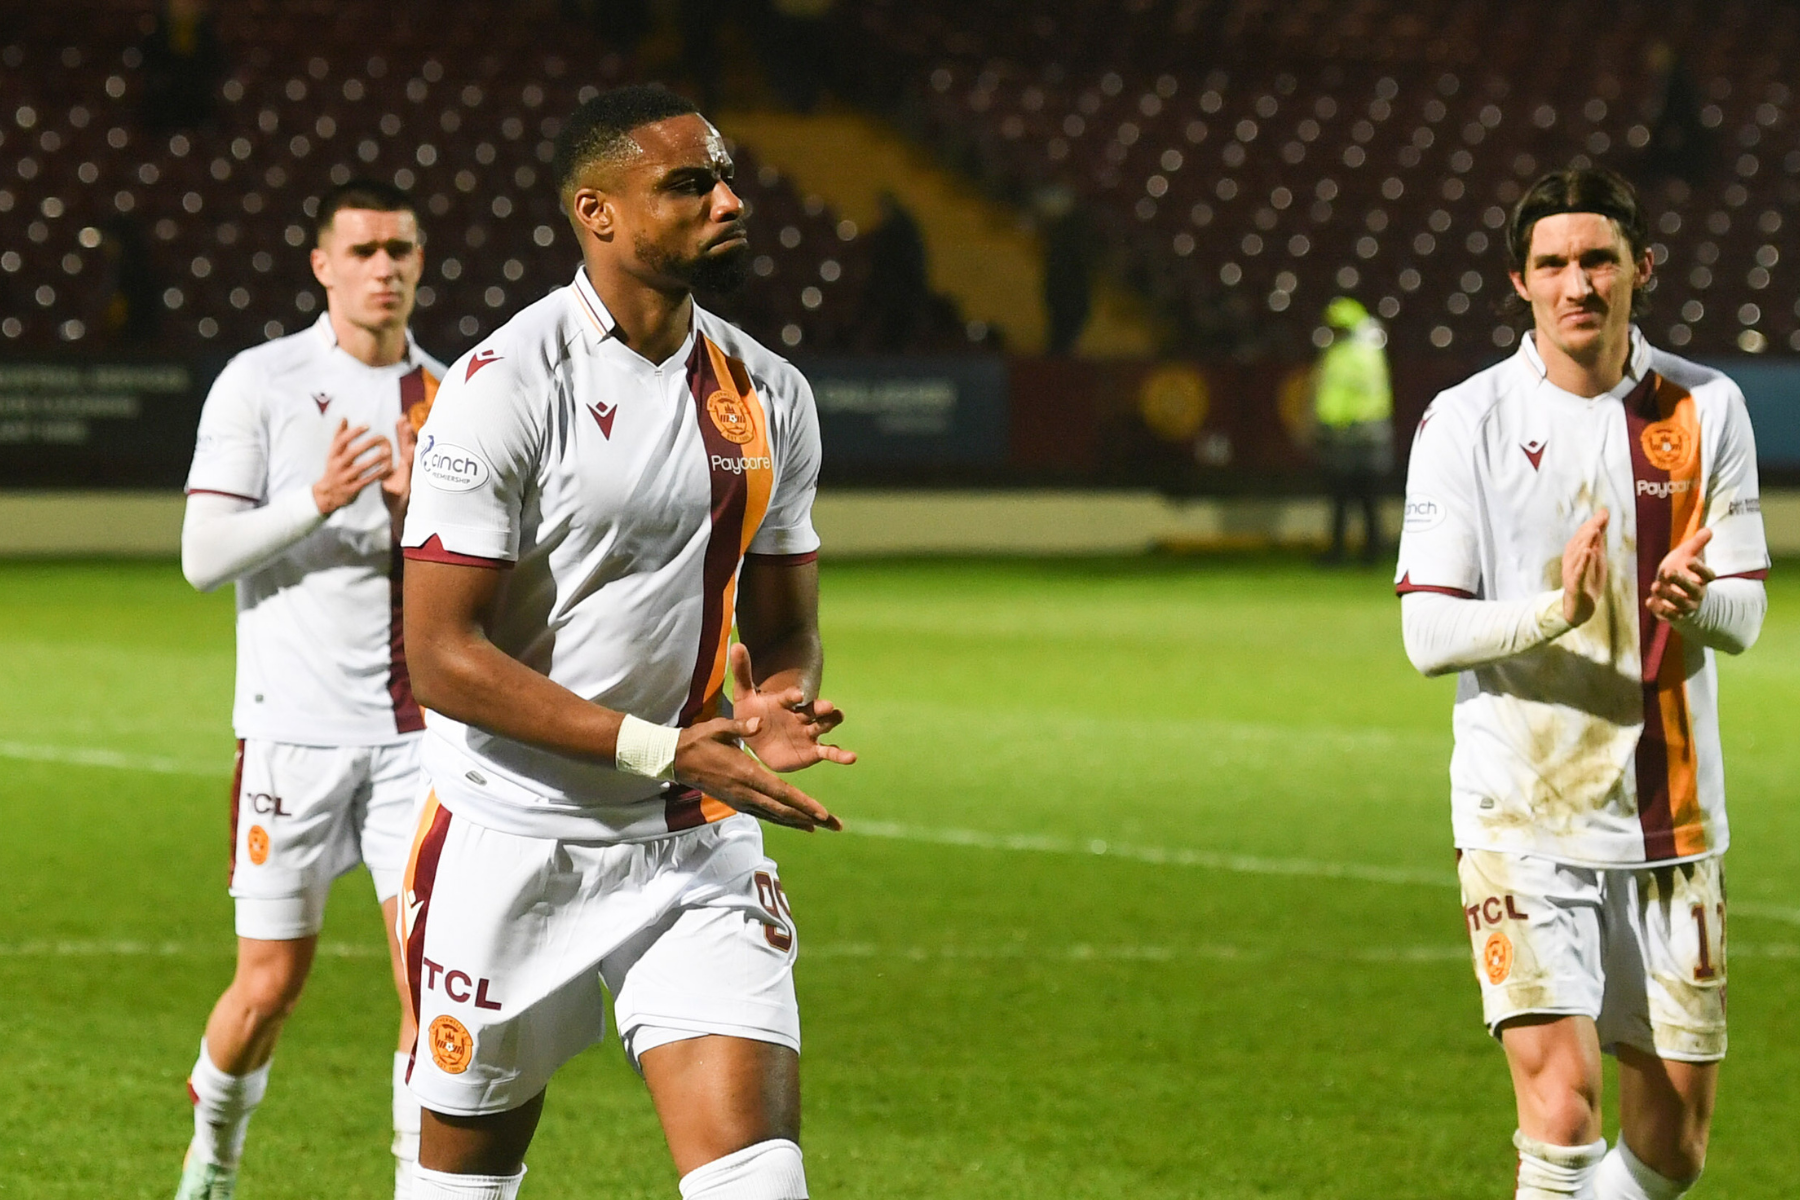 Job Obika to lean on experience to help push Motherwell to safety